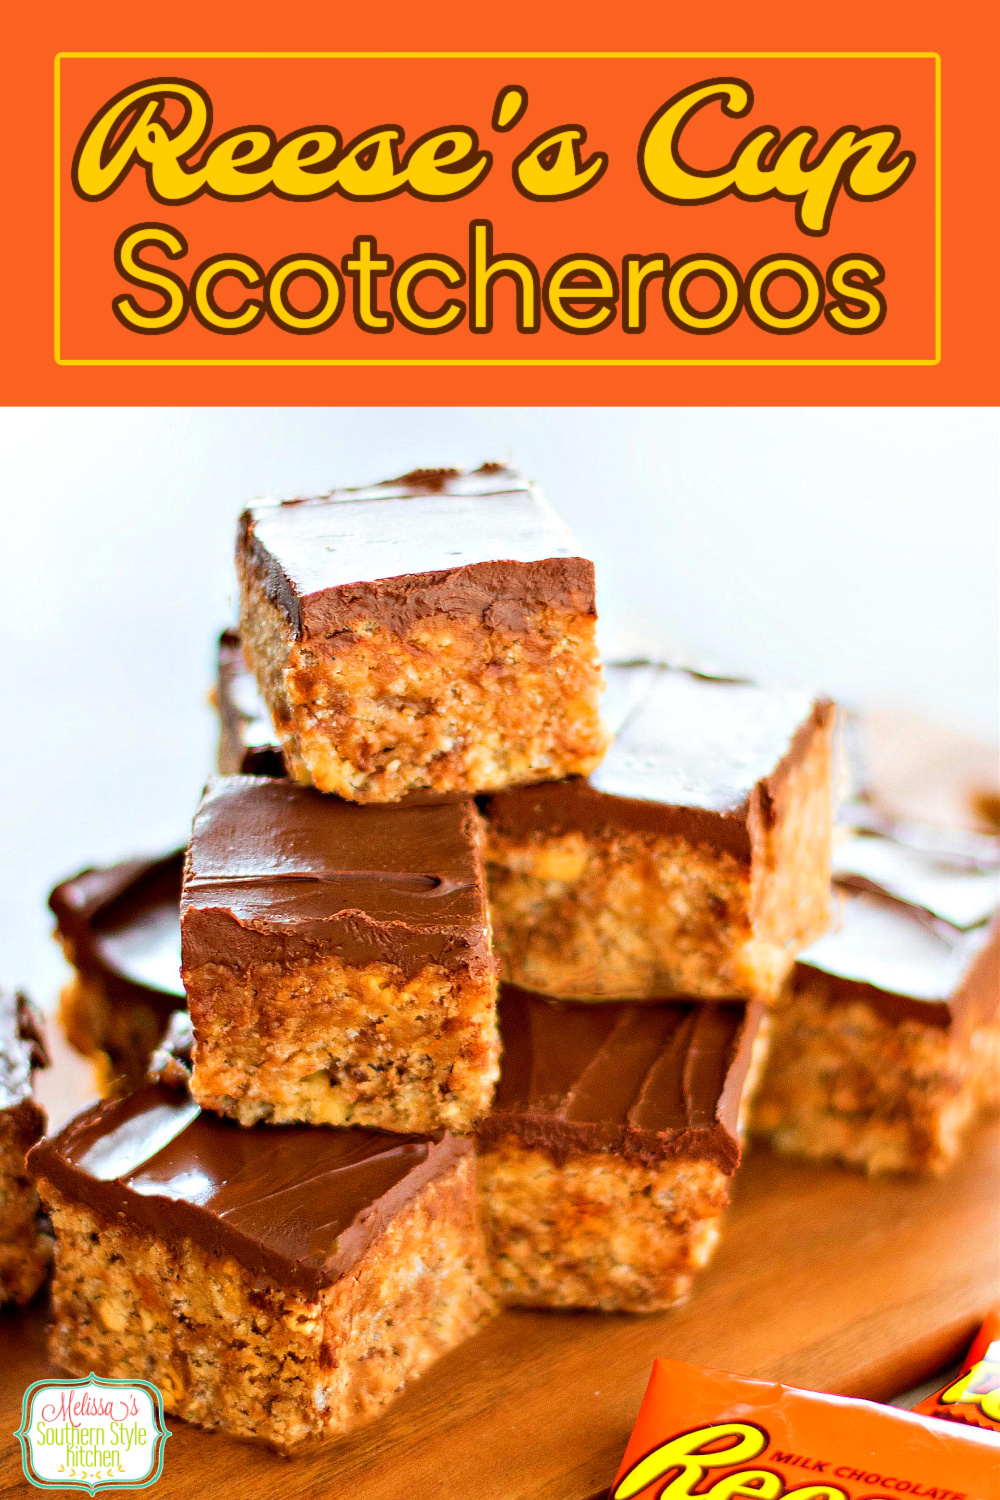 Satisfy your sweet tooth with these easy Reese's Cup Scotcheroos #reesescups #peanutbutter #scotcheroos #chocolate #nobakedesserts #holidayrecipes #dessertfoodrecipes #southernfood #southernrecipes #desserts via @melissasssk